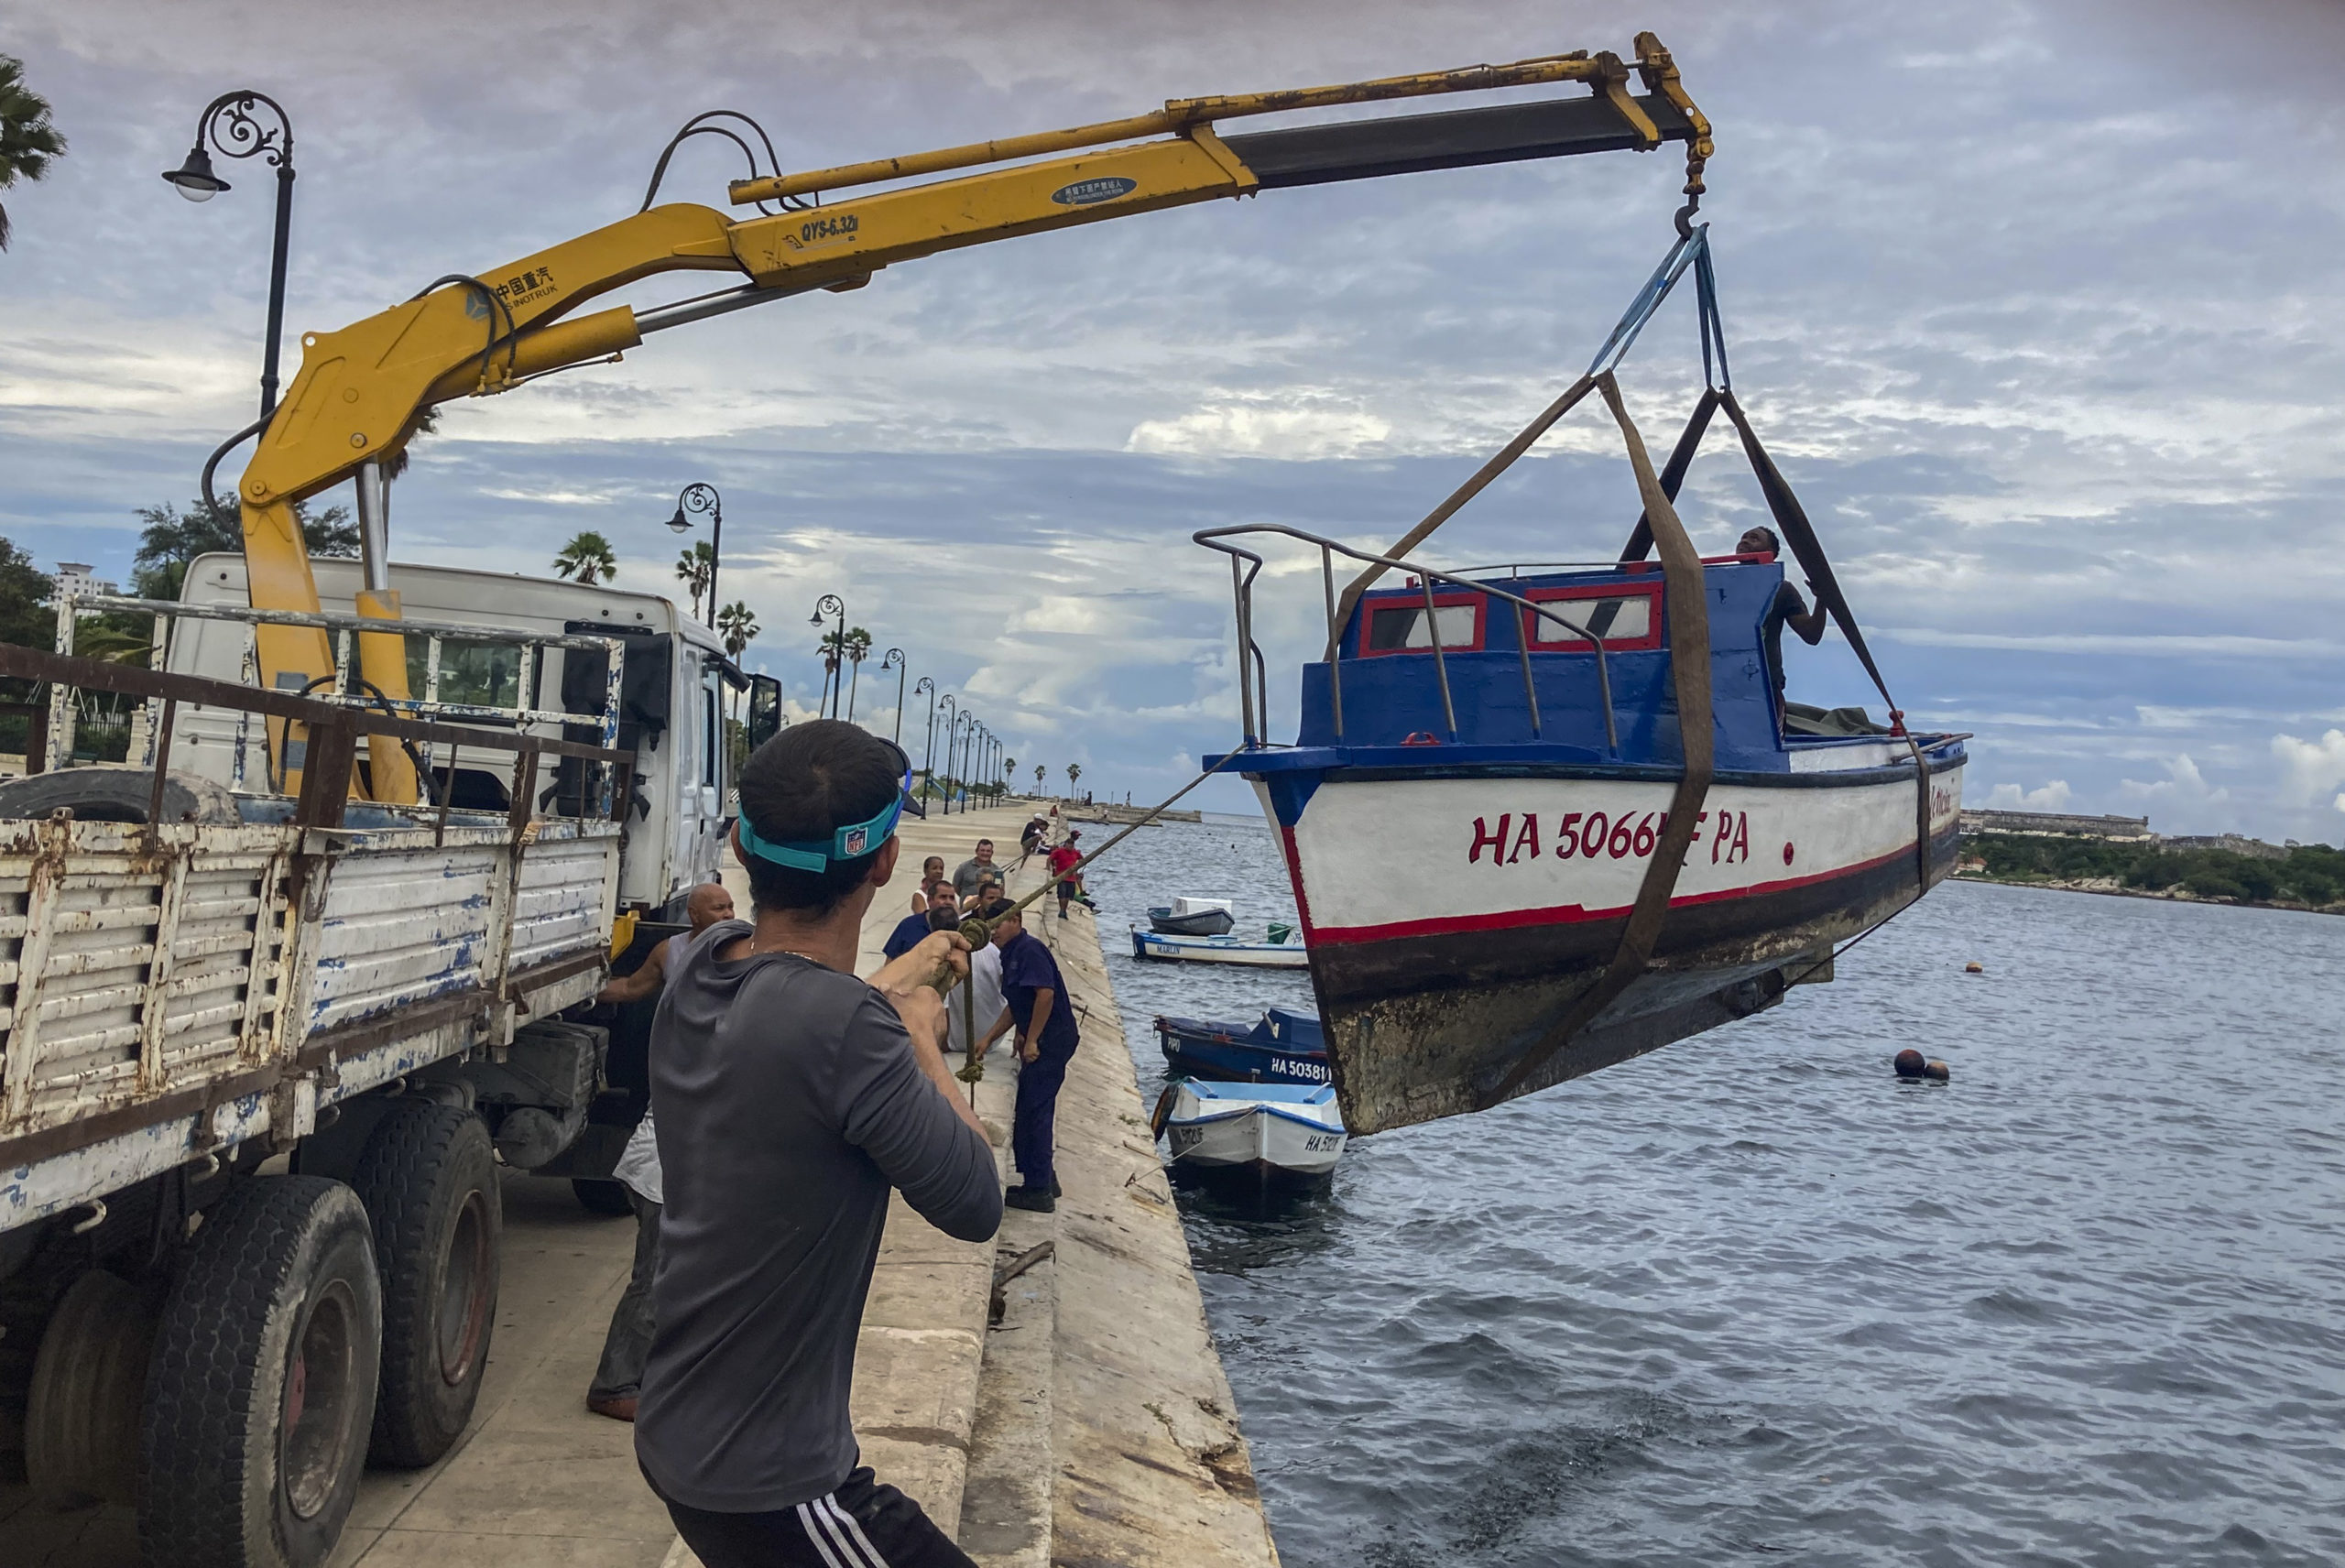 On Monday, workers move a boat out from the water in the bay of Havana, Cuba, as Hurricane Ian prepared to hit Cuba.